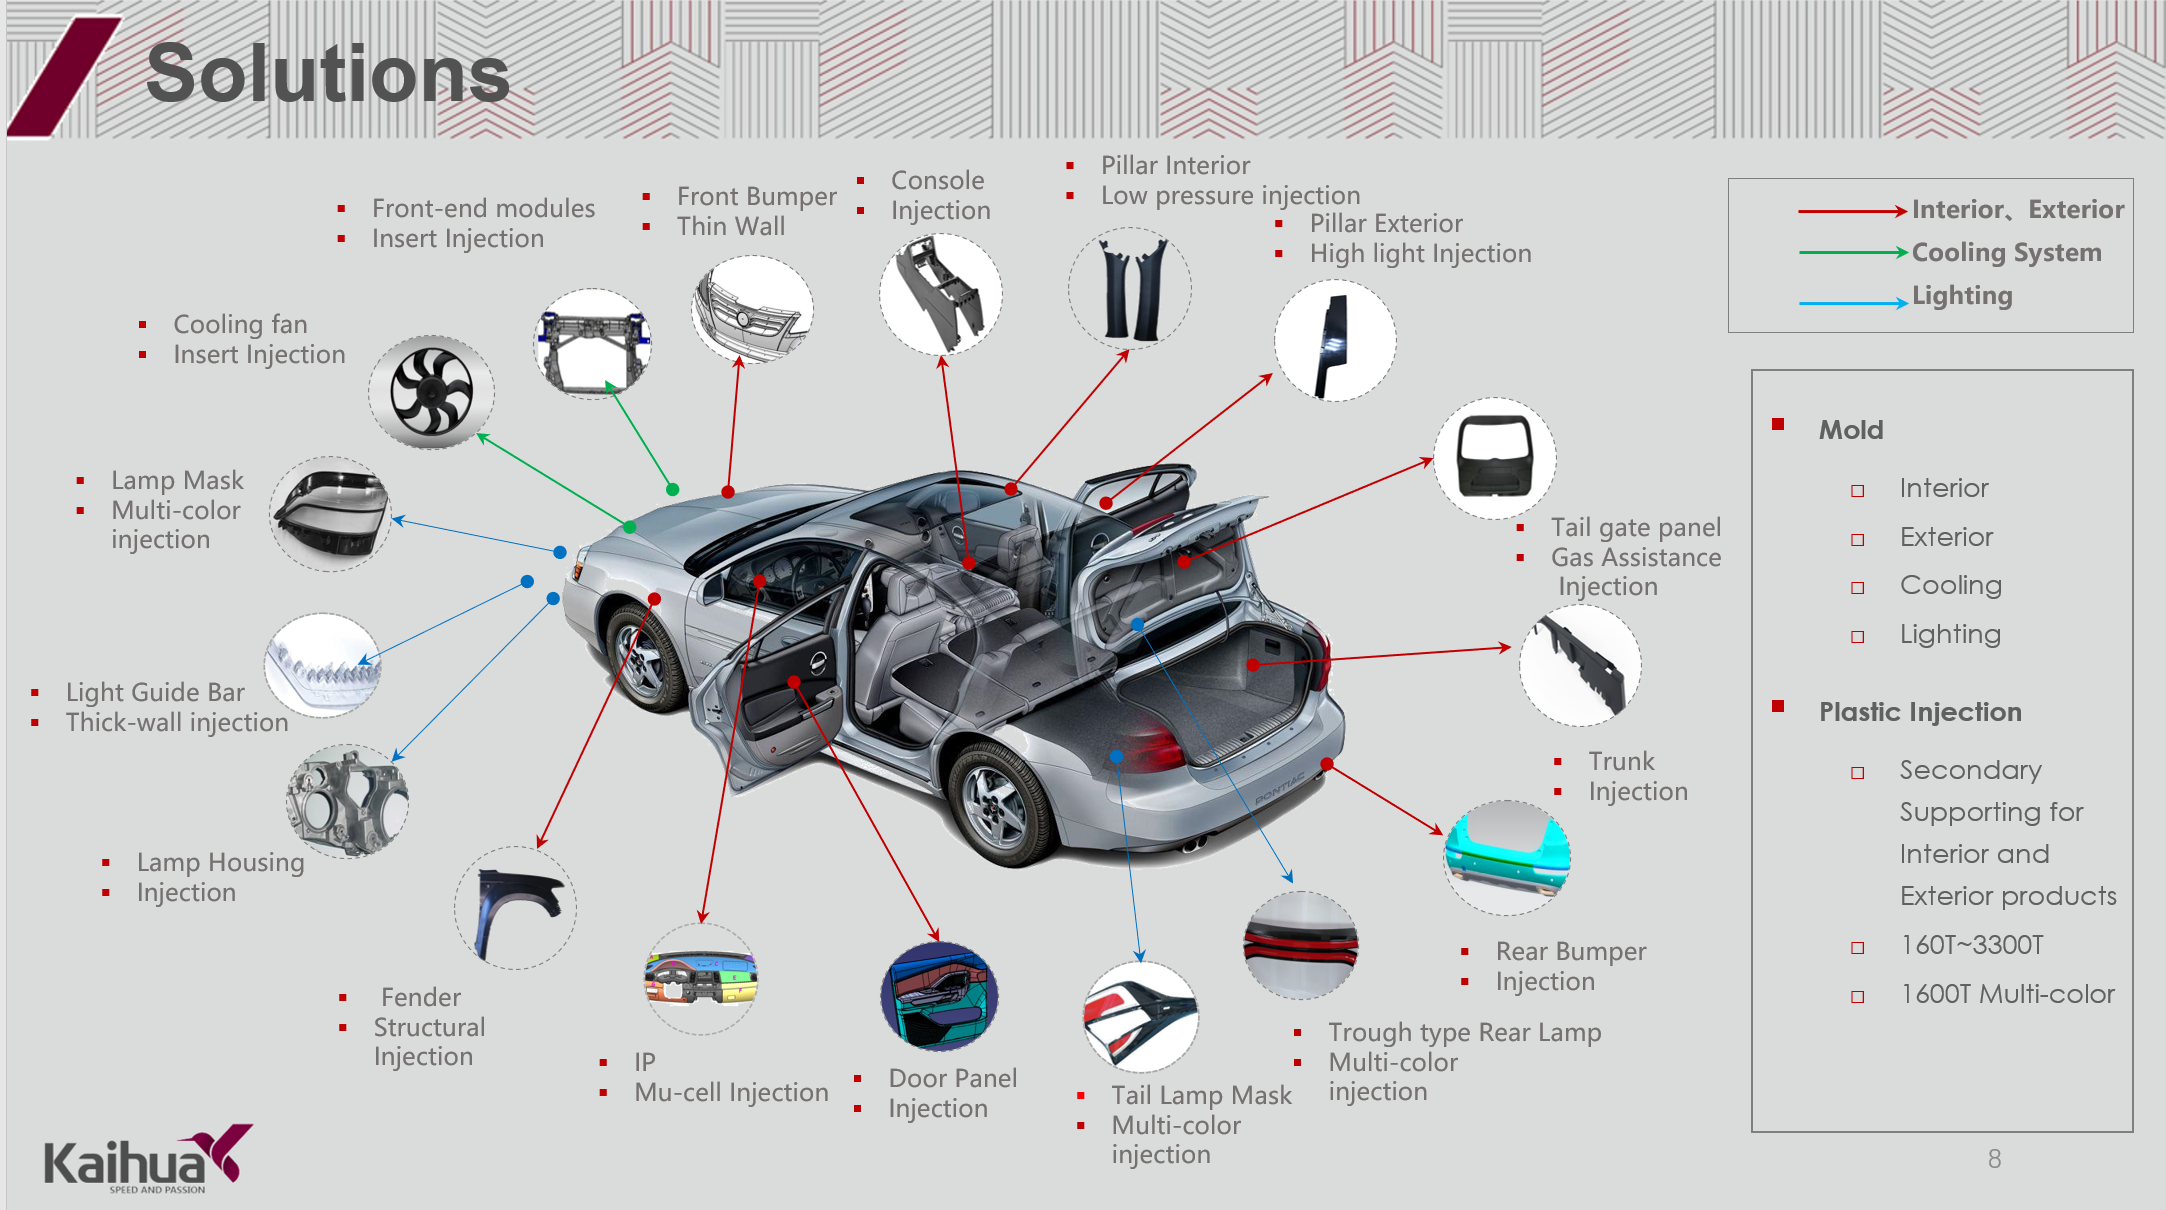 Automotive mold industry: technological progress and market challenges